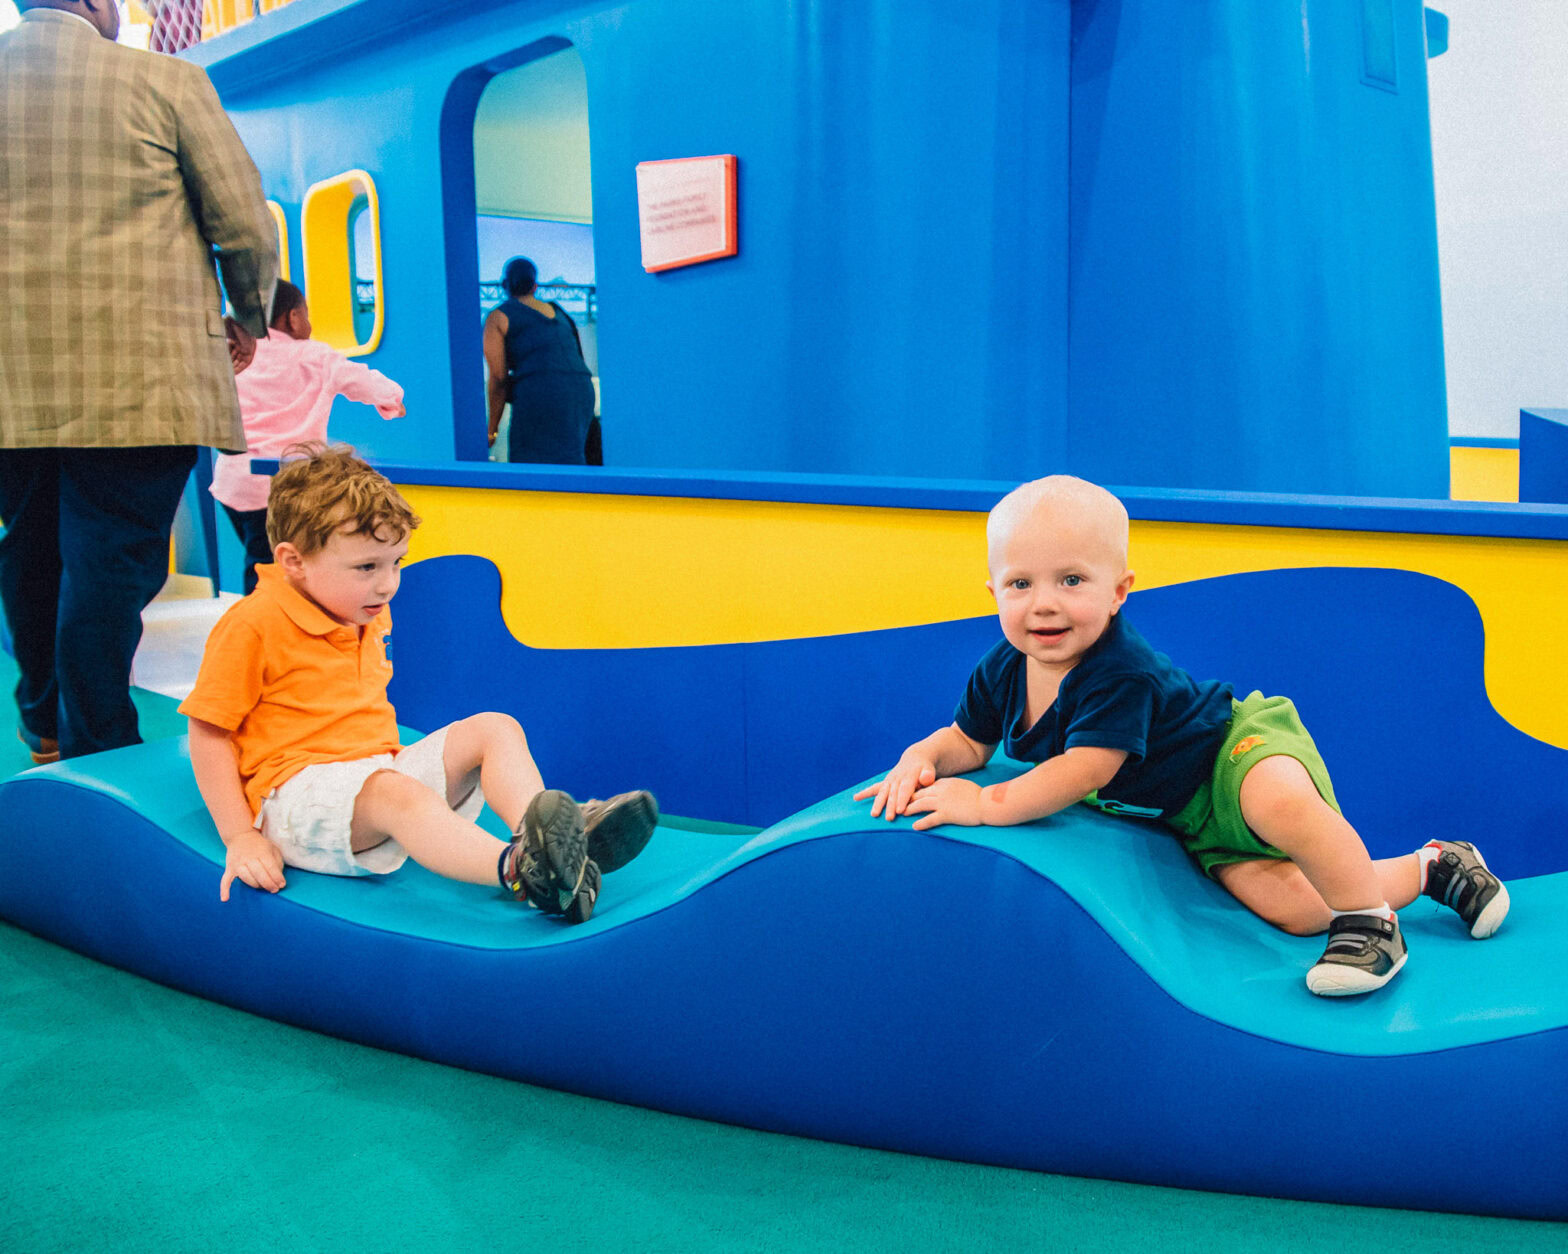 An image of two little boys playing on the blue play ship in the All Hands on Deck playing area.